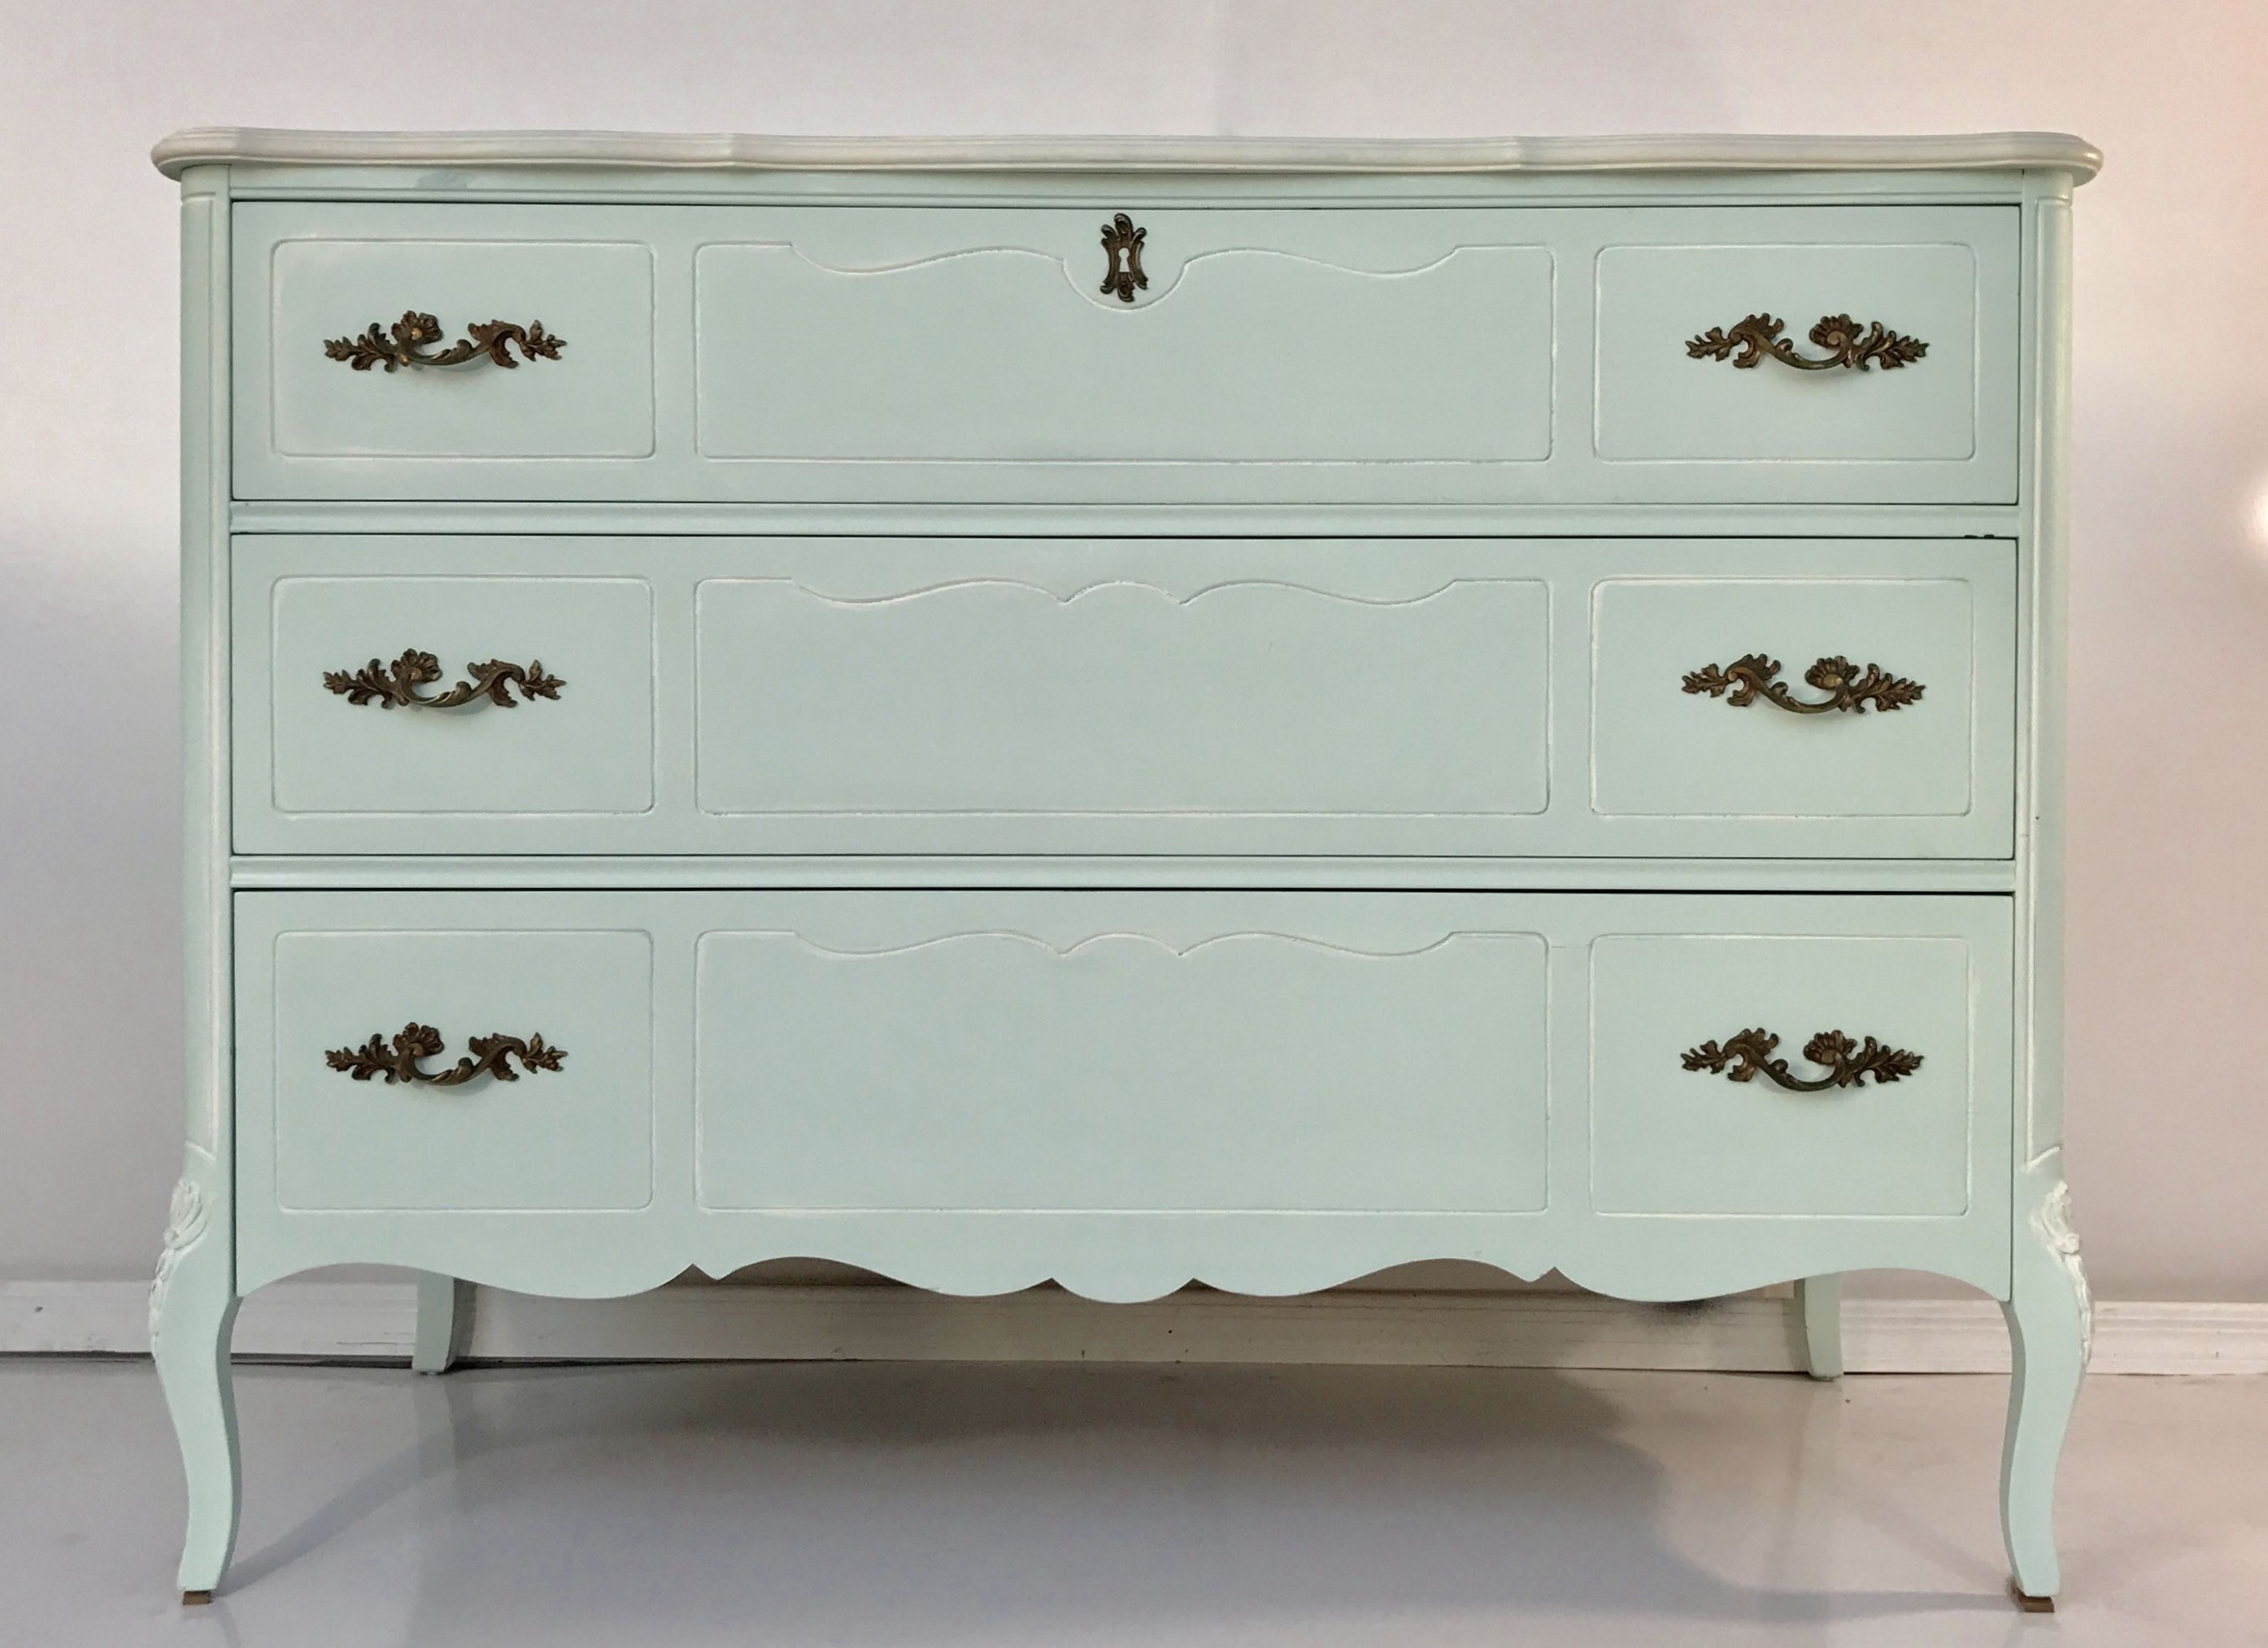 9 Best Green Ideas For Painted Furniture Images In 9 ..